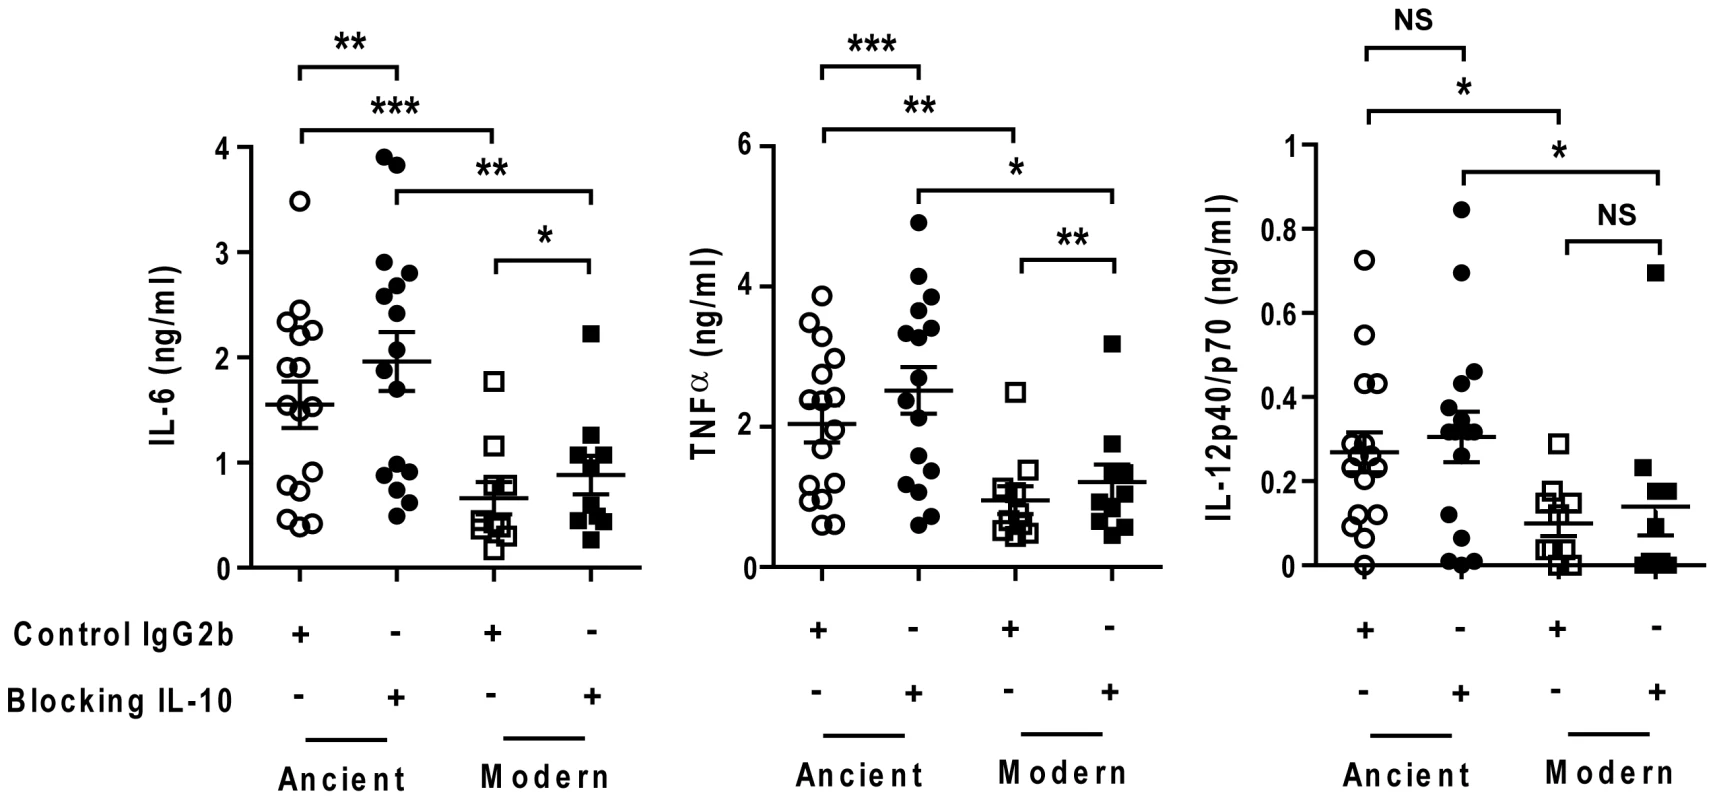 The delayed inflammatory response of modern lineage is not due to IL-10.